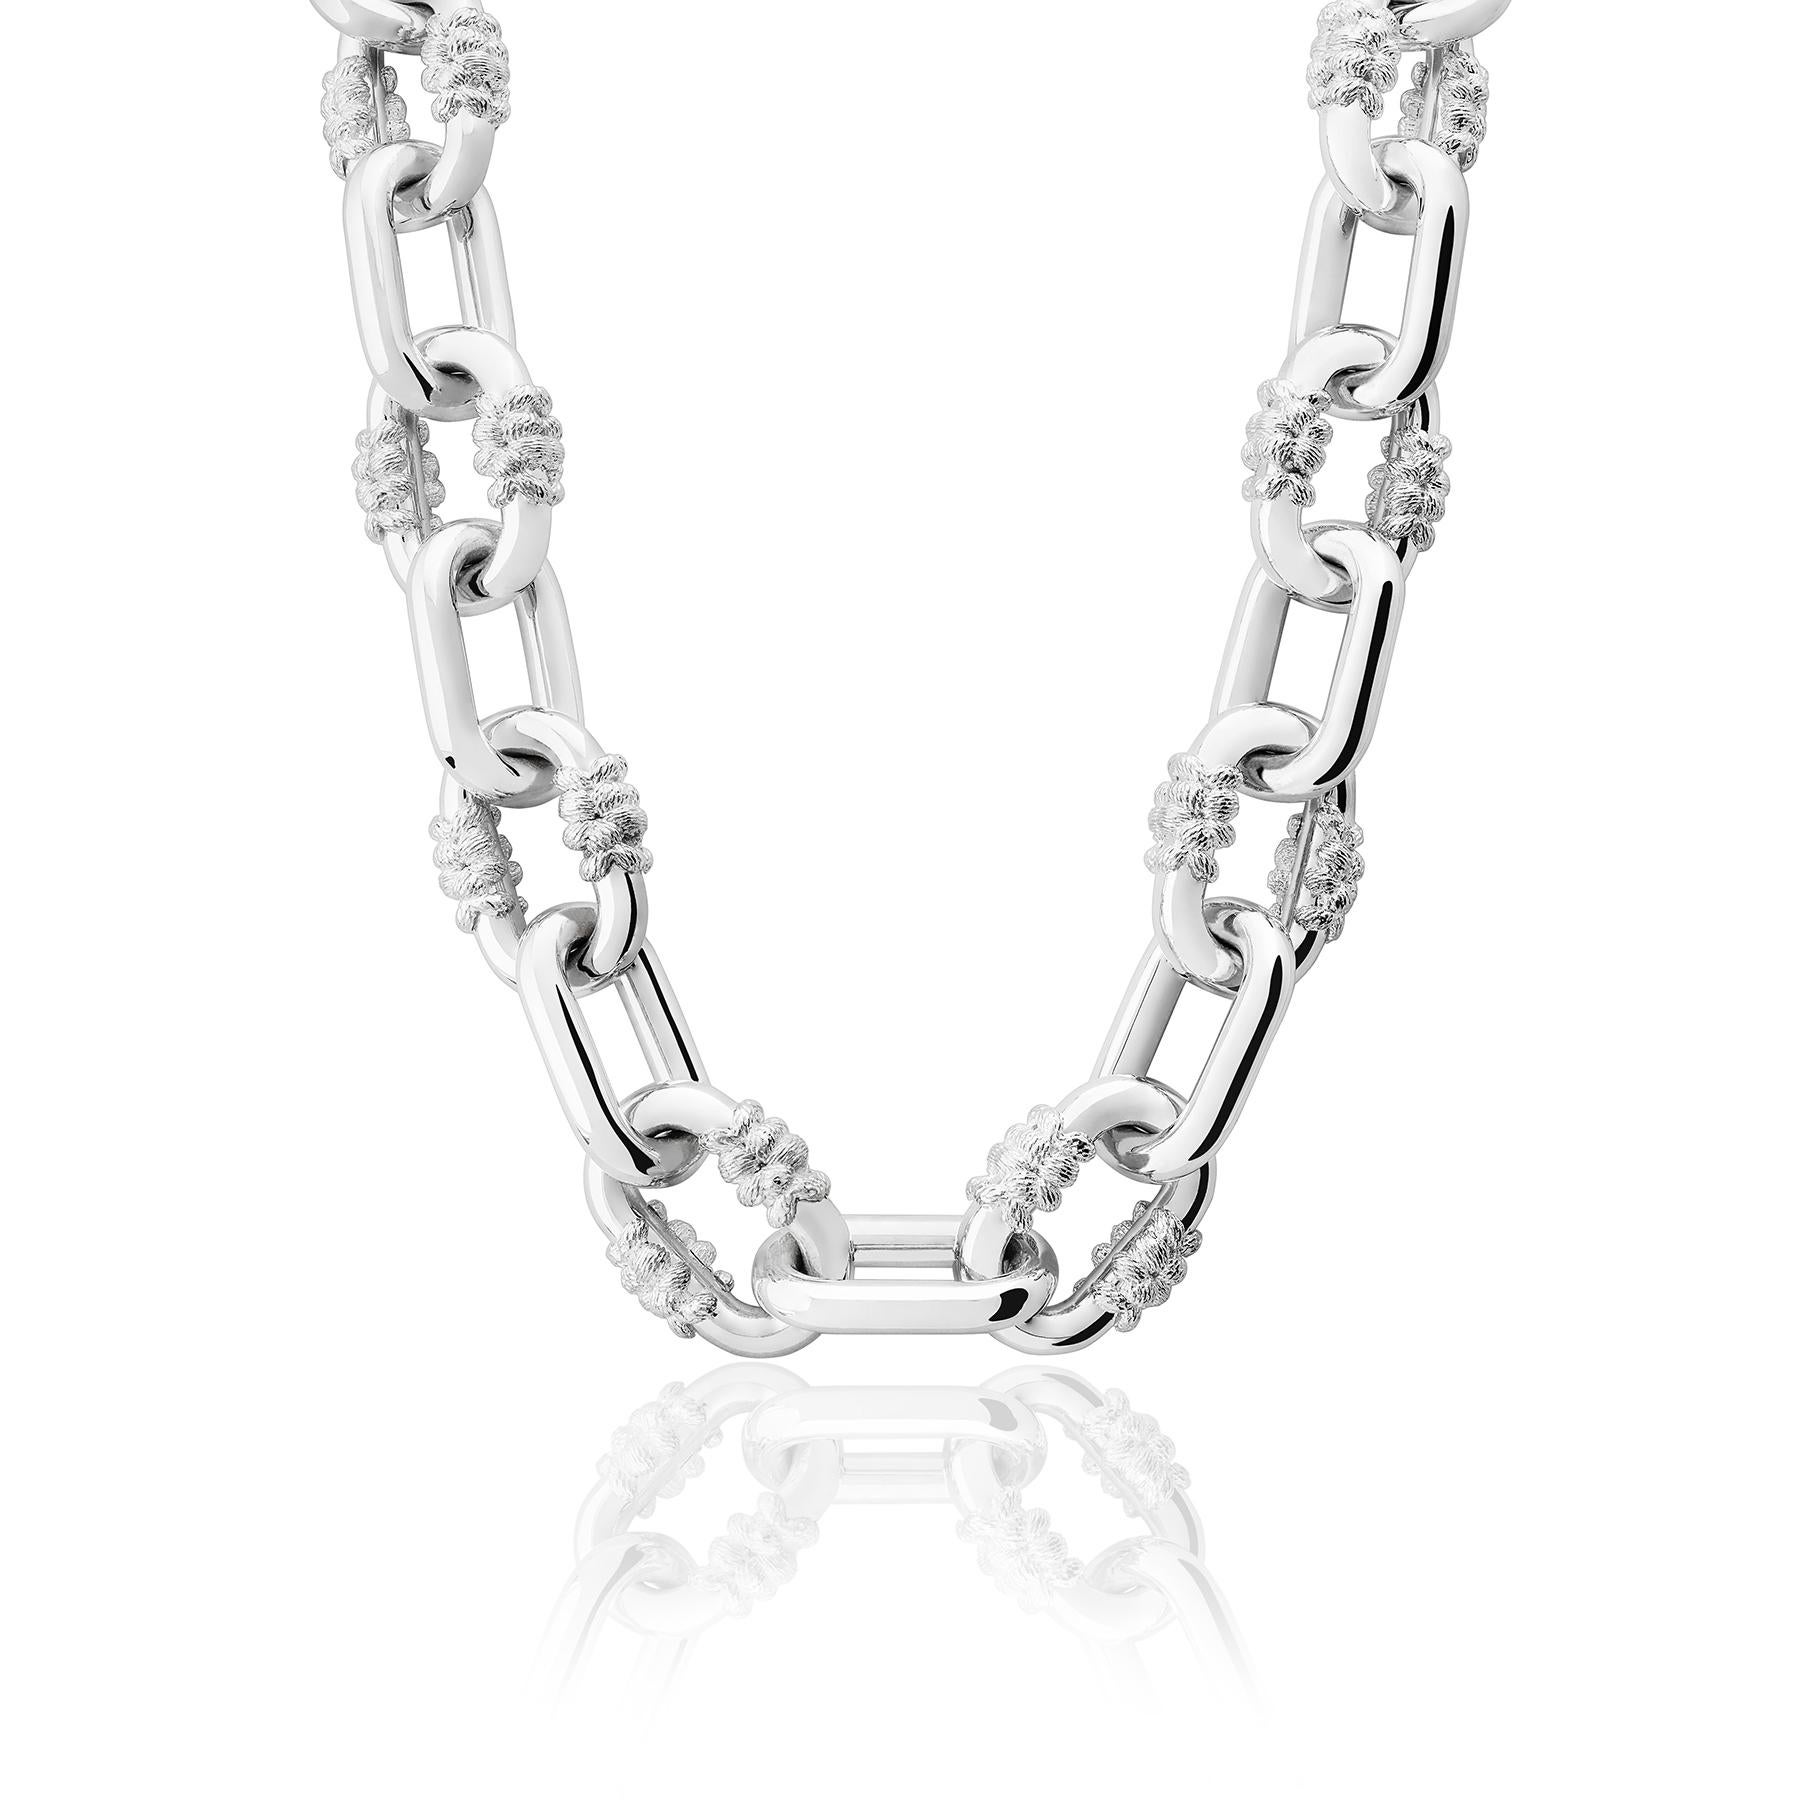 The Bordados Chain Choker from the Bordados Collection by TANE is handmade in sterling silver. The piece consists of a series of links interspersed between a polished finish and those that support the motifs of the collection, whose texture